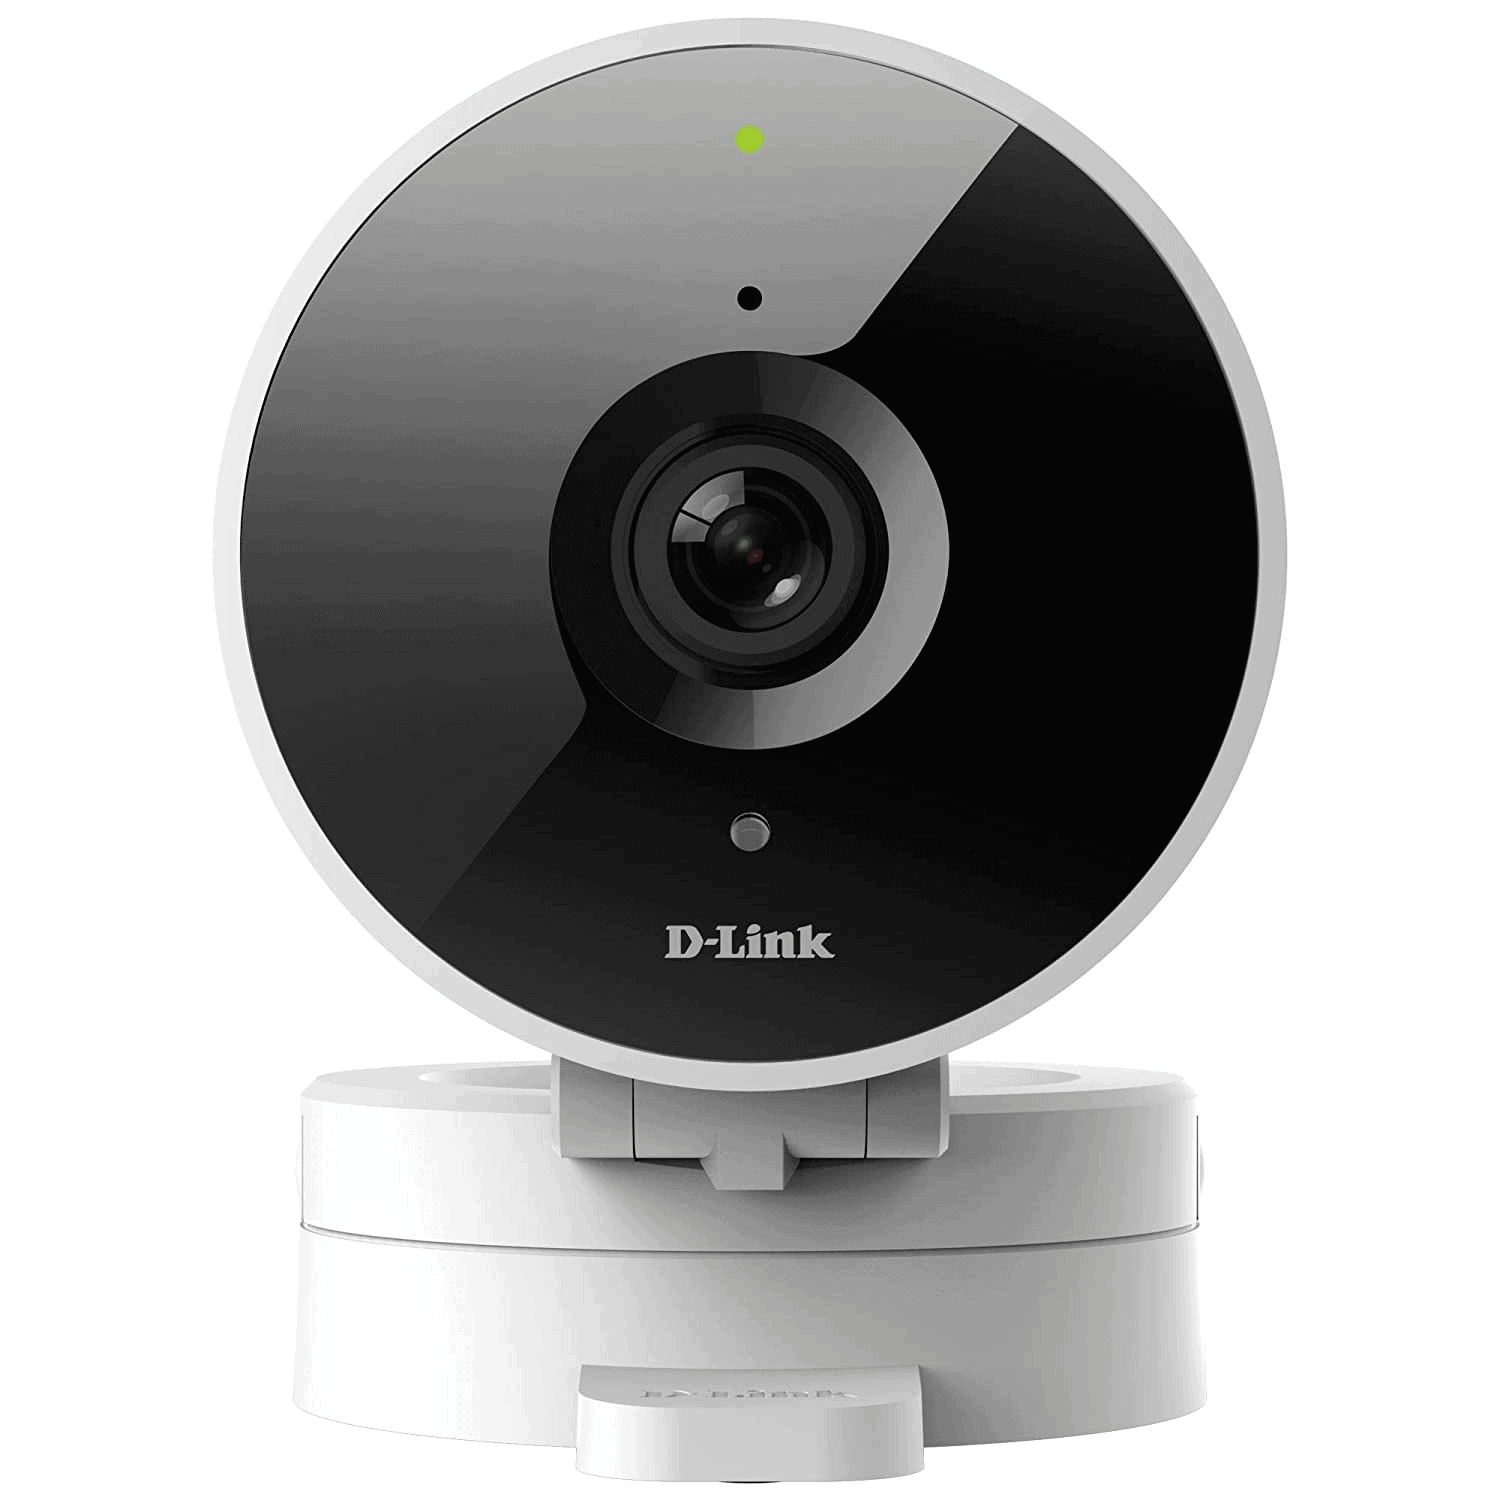 15 Best Wireless Security Camera Rated By Experts 11